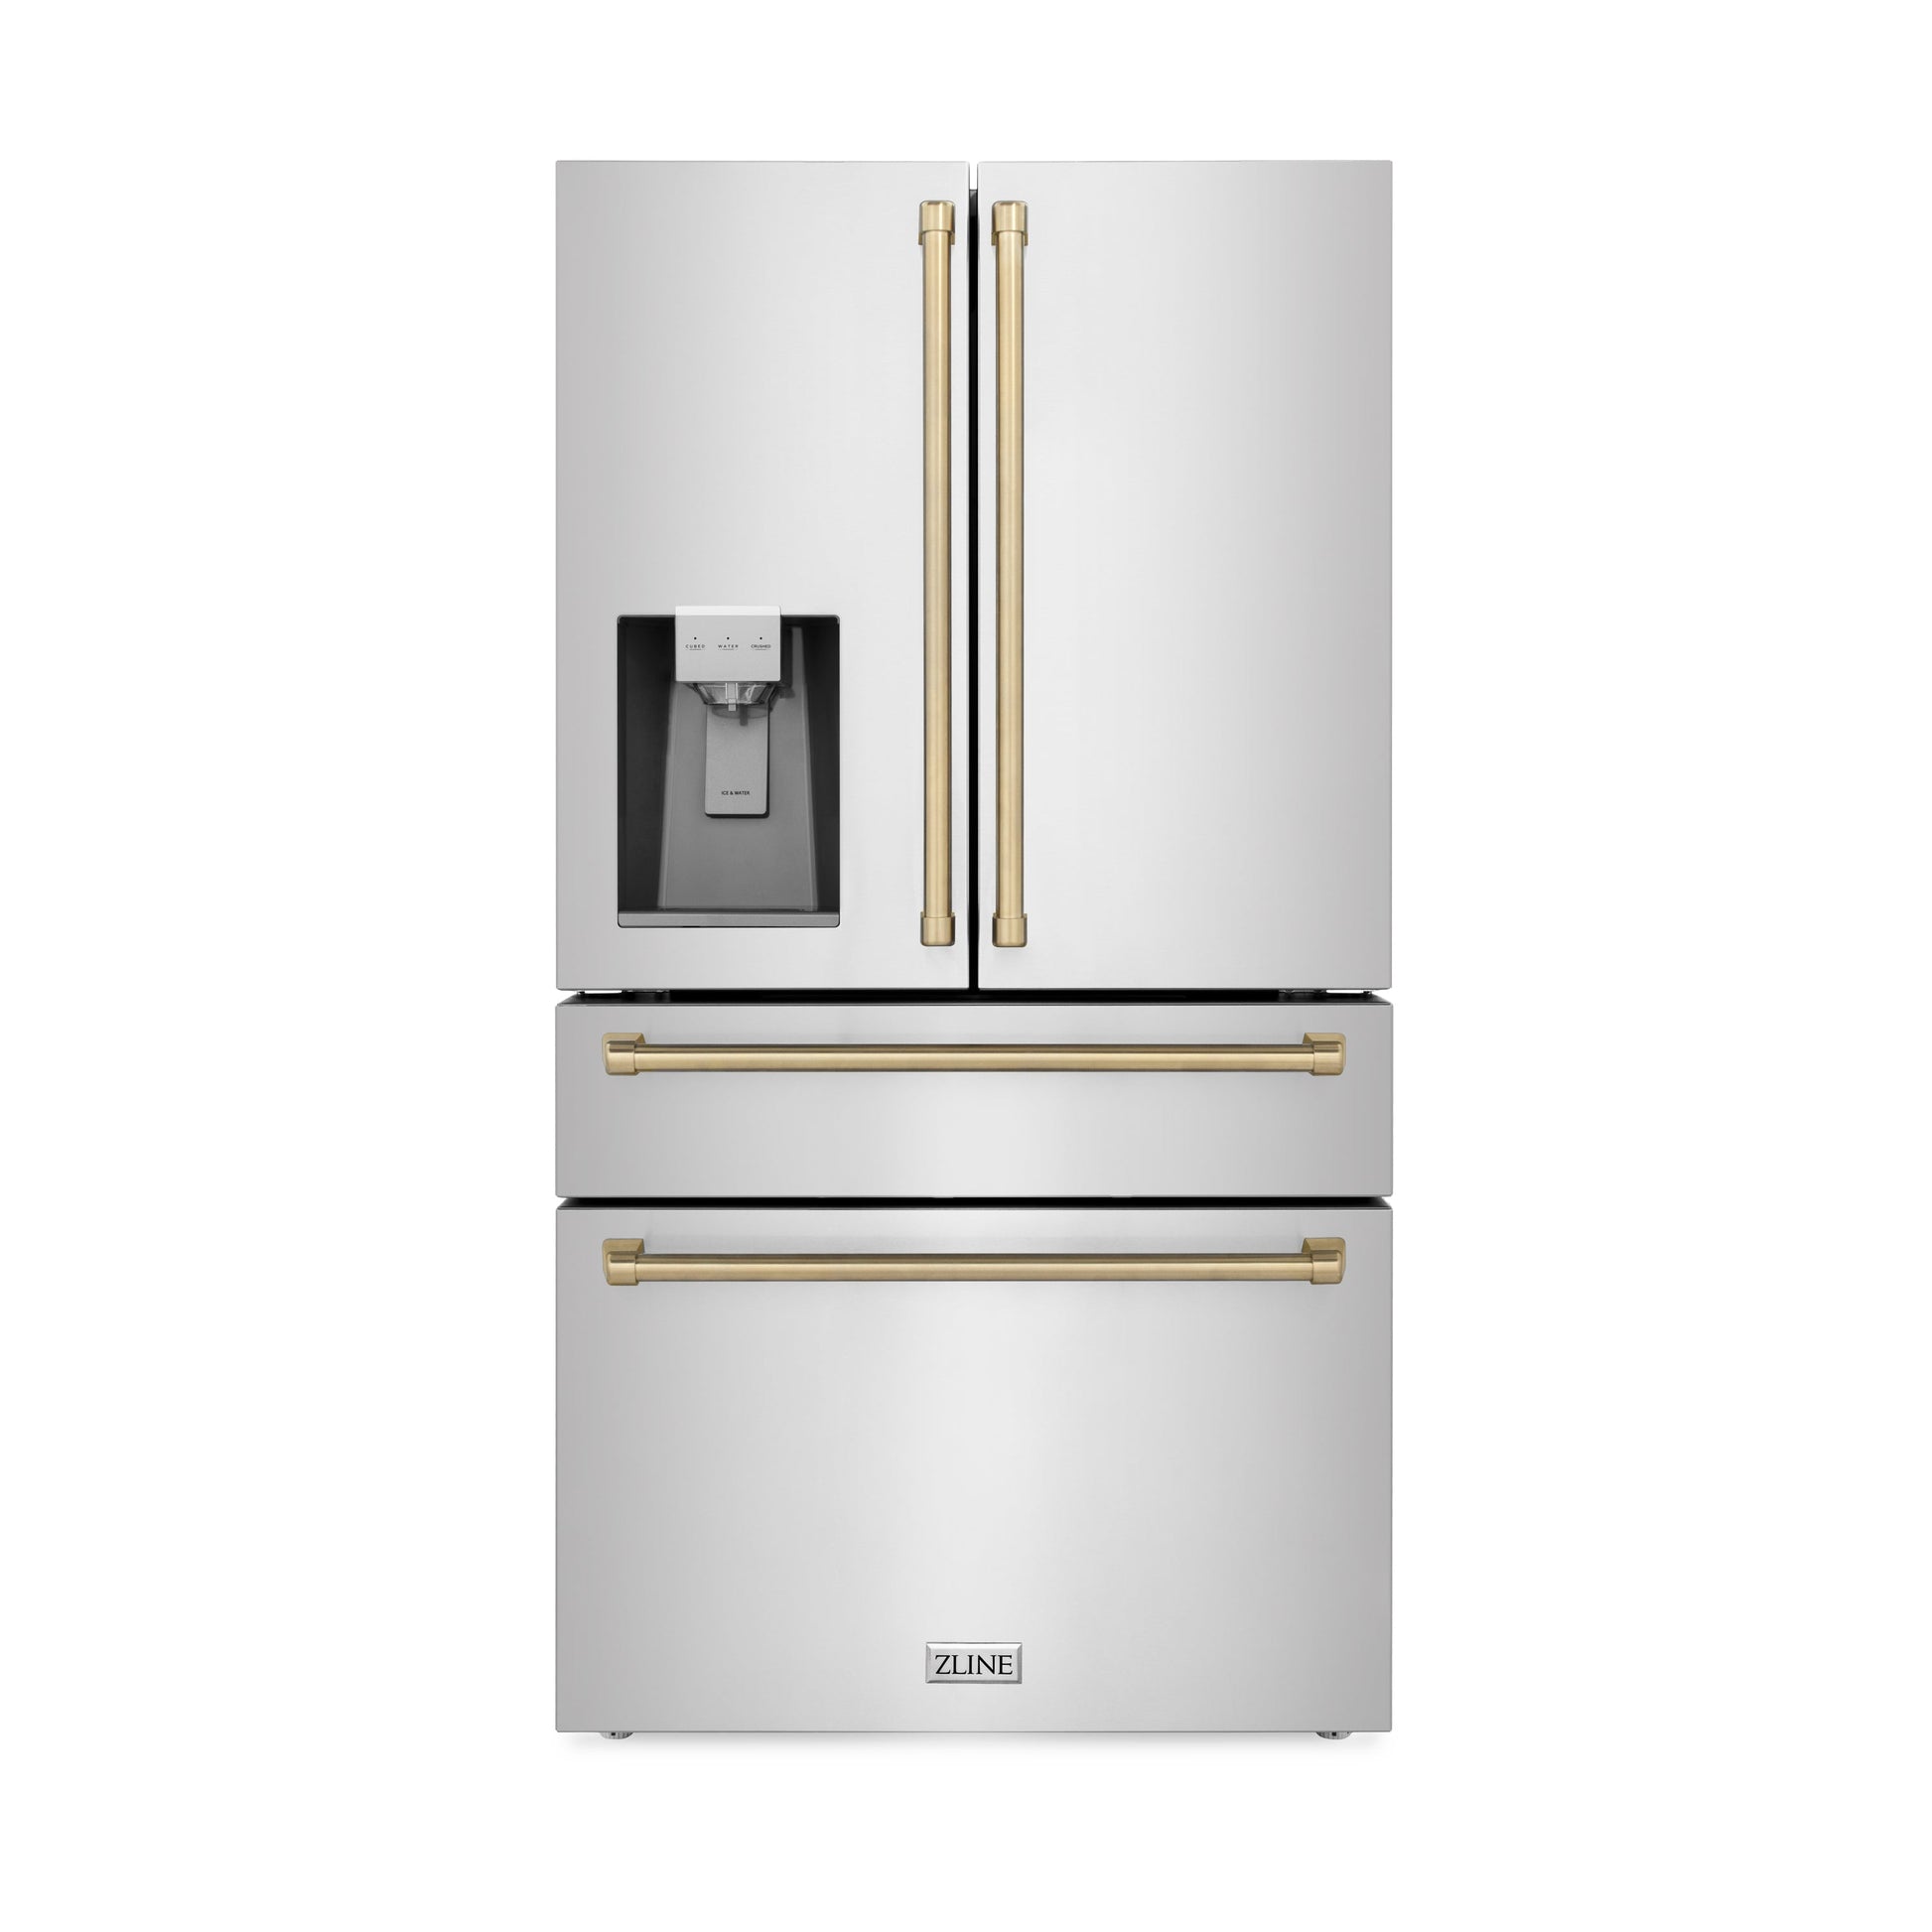 ZLINE 4-Appliance 48" Autograph Edition Kitchen Package with Stainless Steel Dual Fuel Range, Range Hood, Dishwasher, and Refrigeration Including External Water Dispenser with Polished Gold Accents